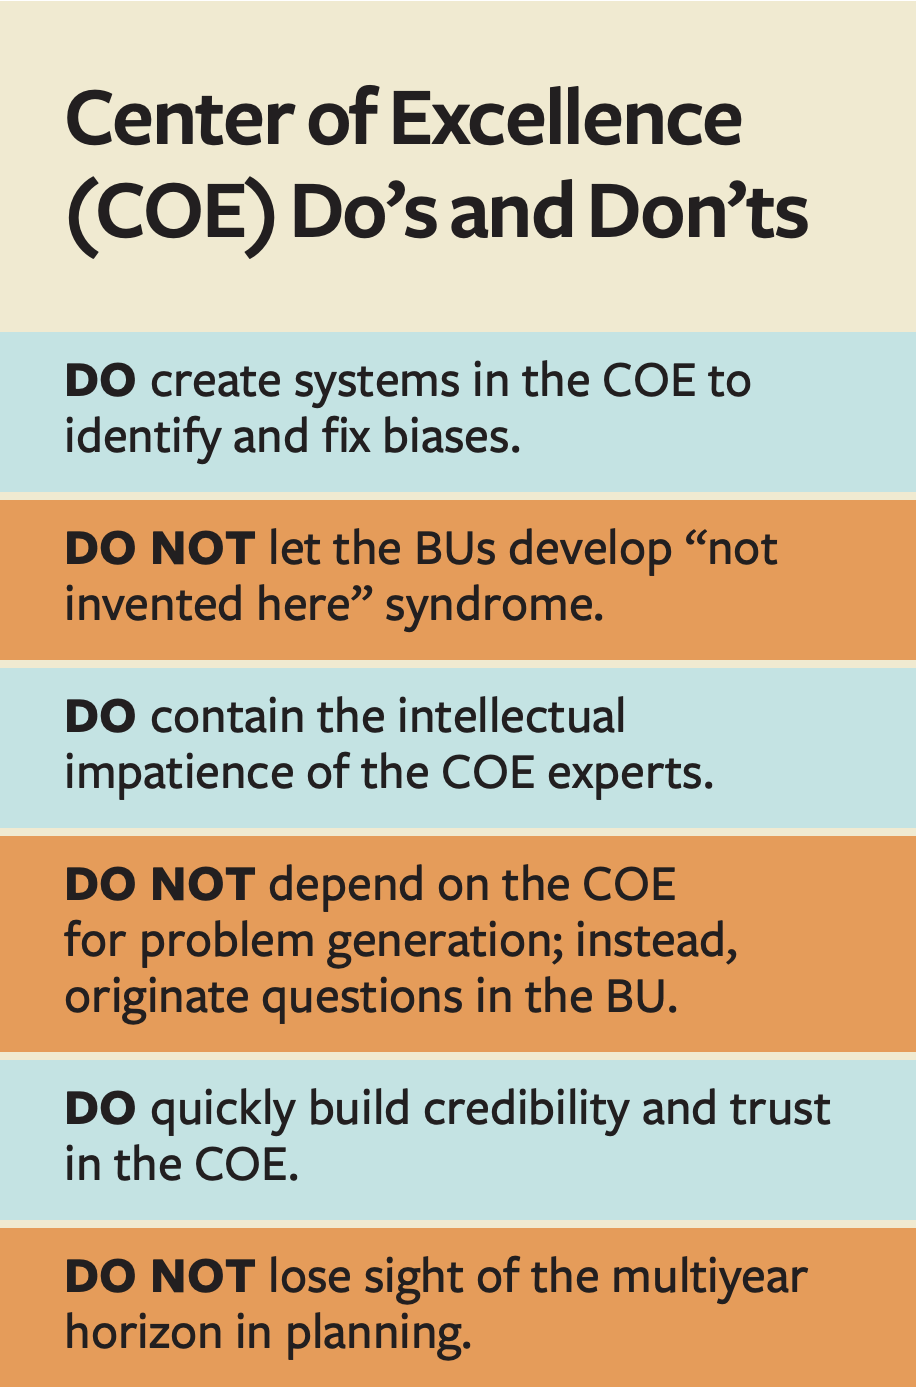 Center of Excellence (COE) Do’s and Don’ts